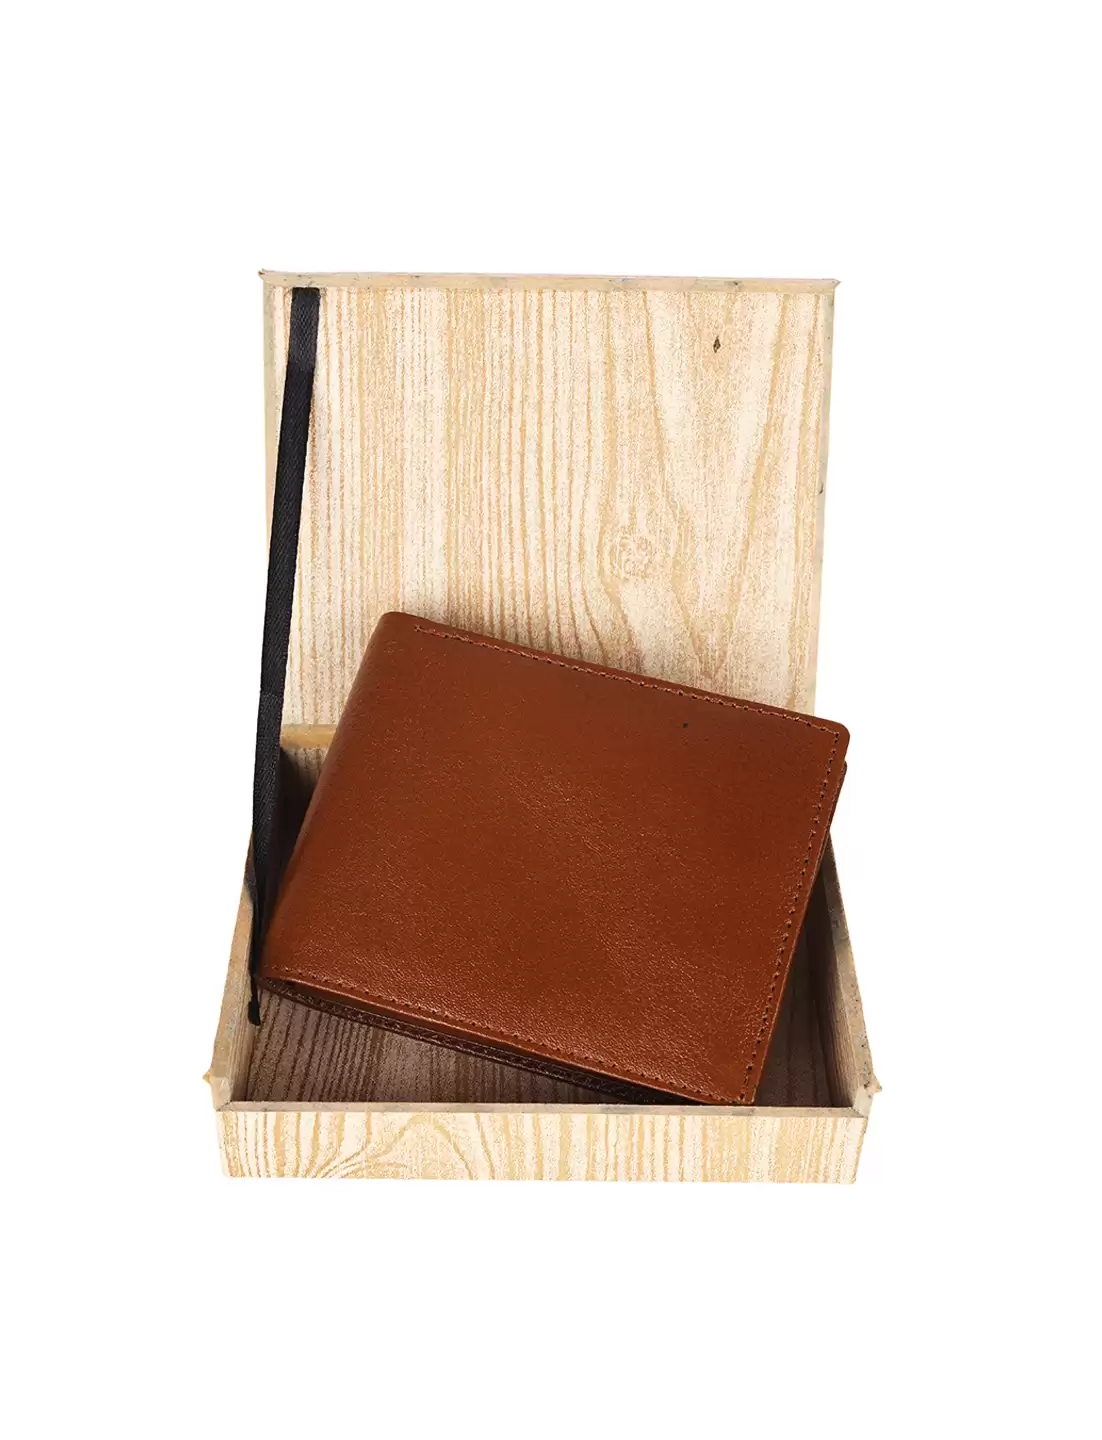 Get Customized Wallet for Men Faux Leather Gents Purse – Nutcase